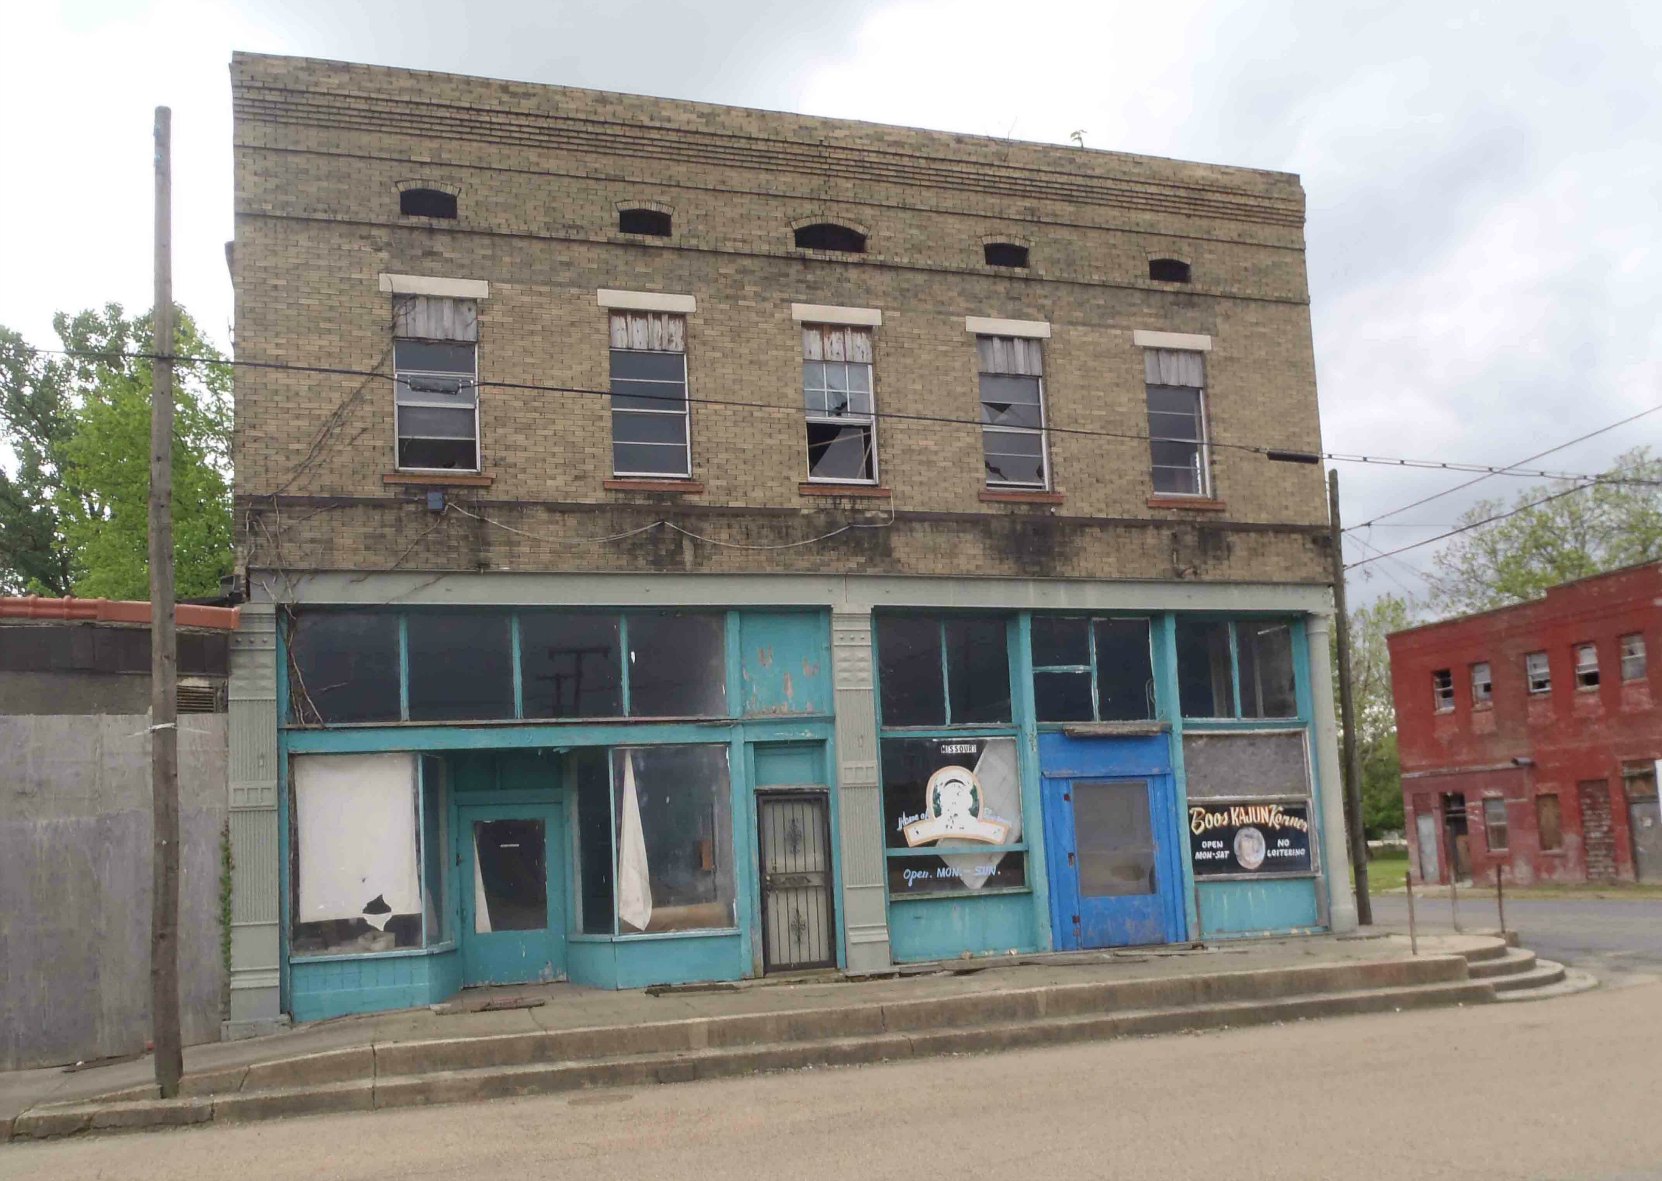 119 Missouri Street in downtown Helena, Arkansas. This building once contained the Kit Kat Club where bluesmen like Robert Johnson played.